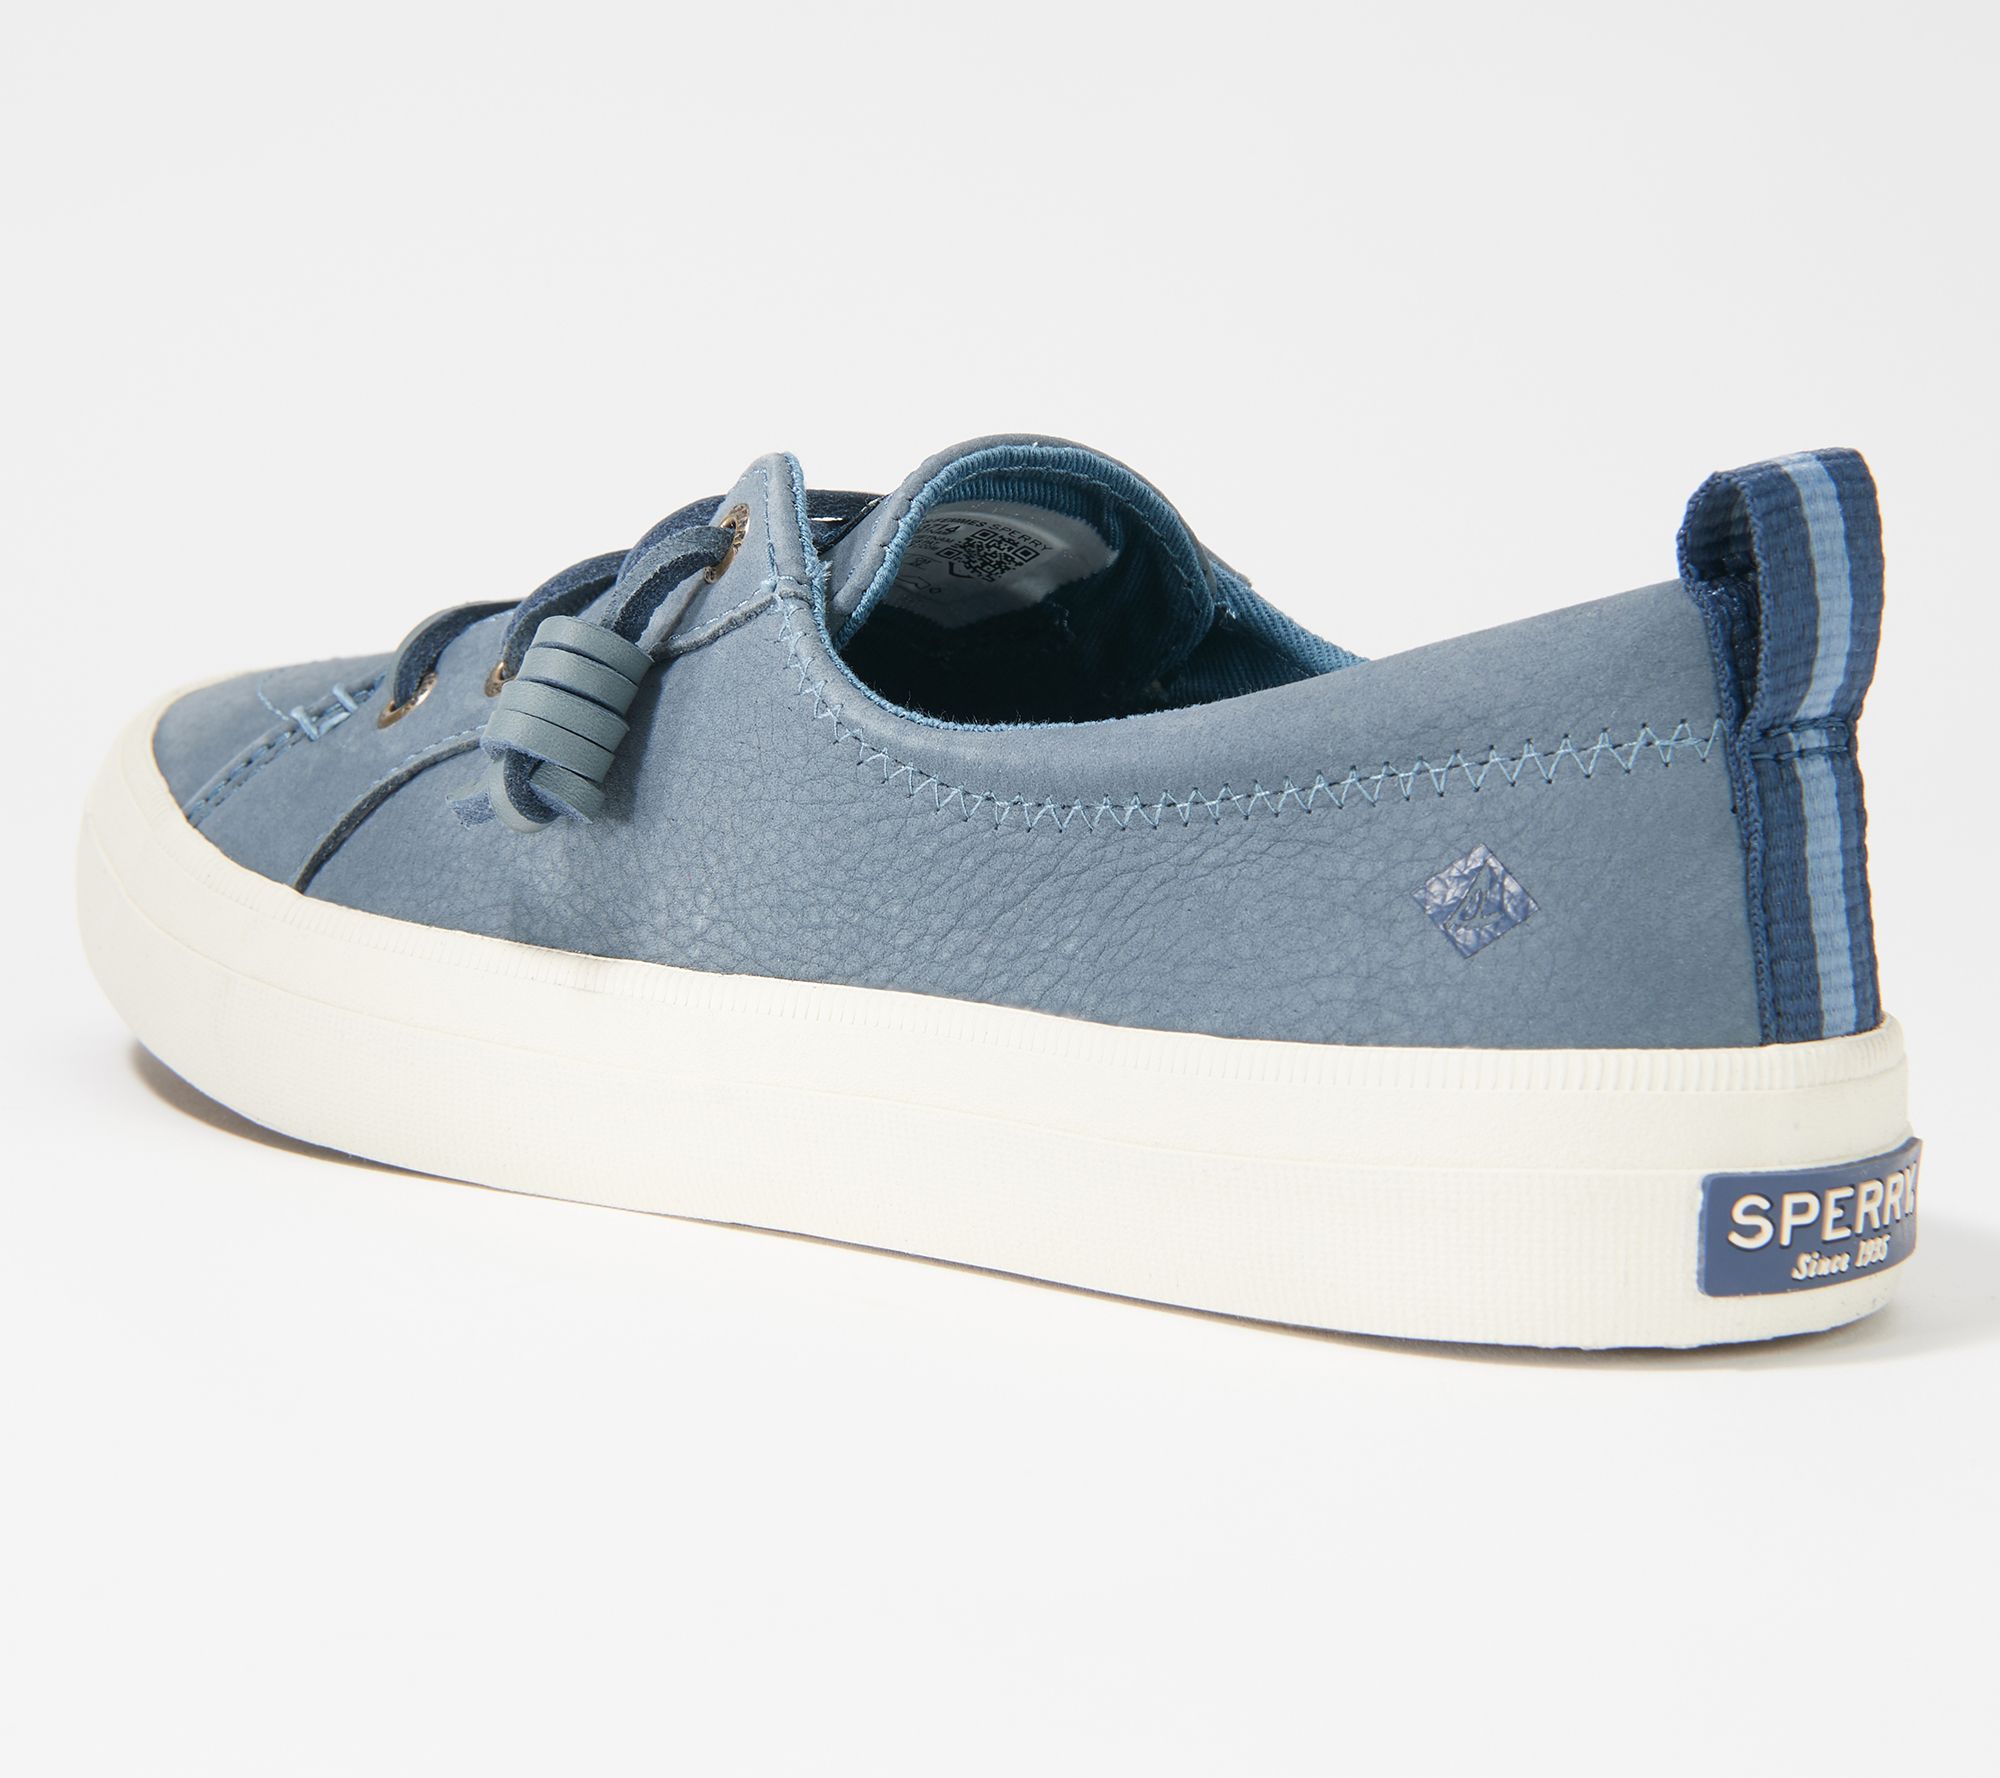 Sperry Crest Vibe Washable Leather Slip-On Sneakers - QVC.com